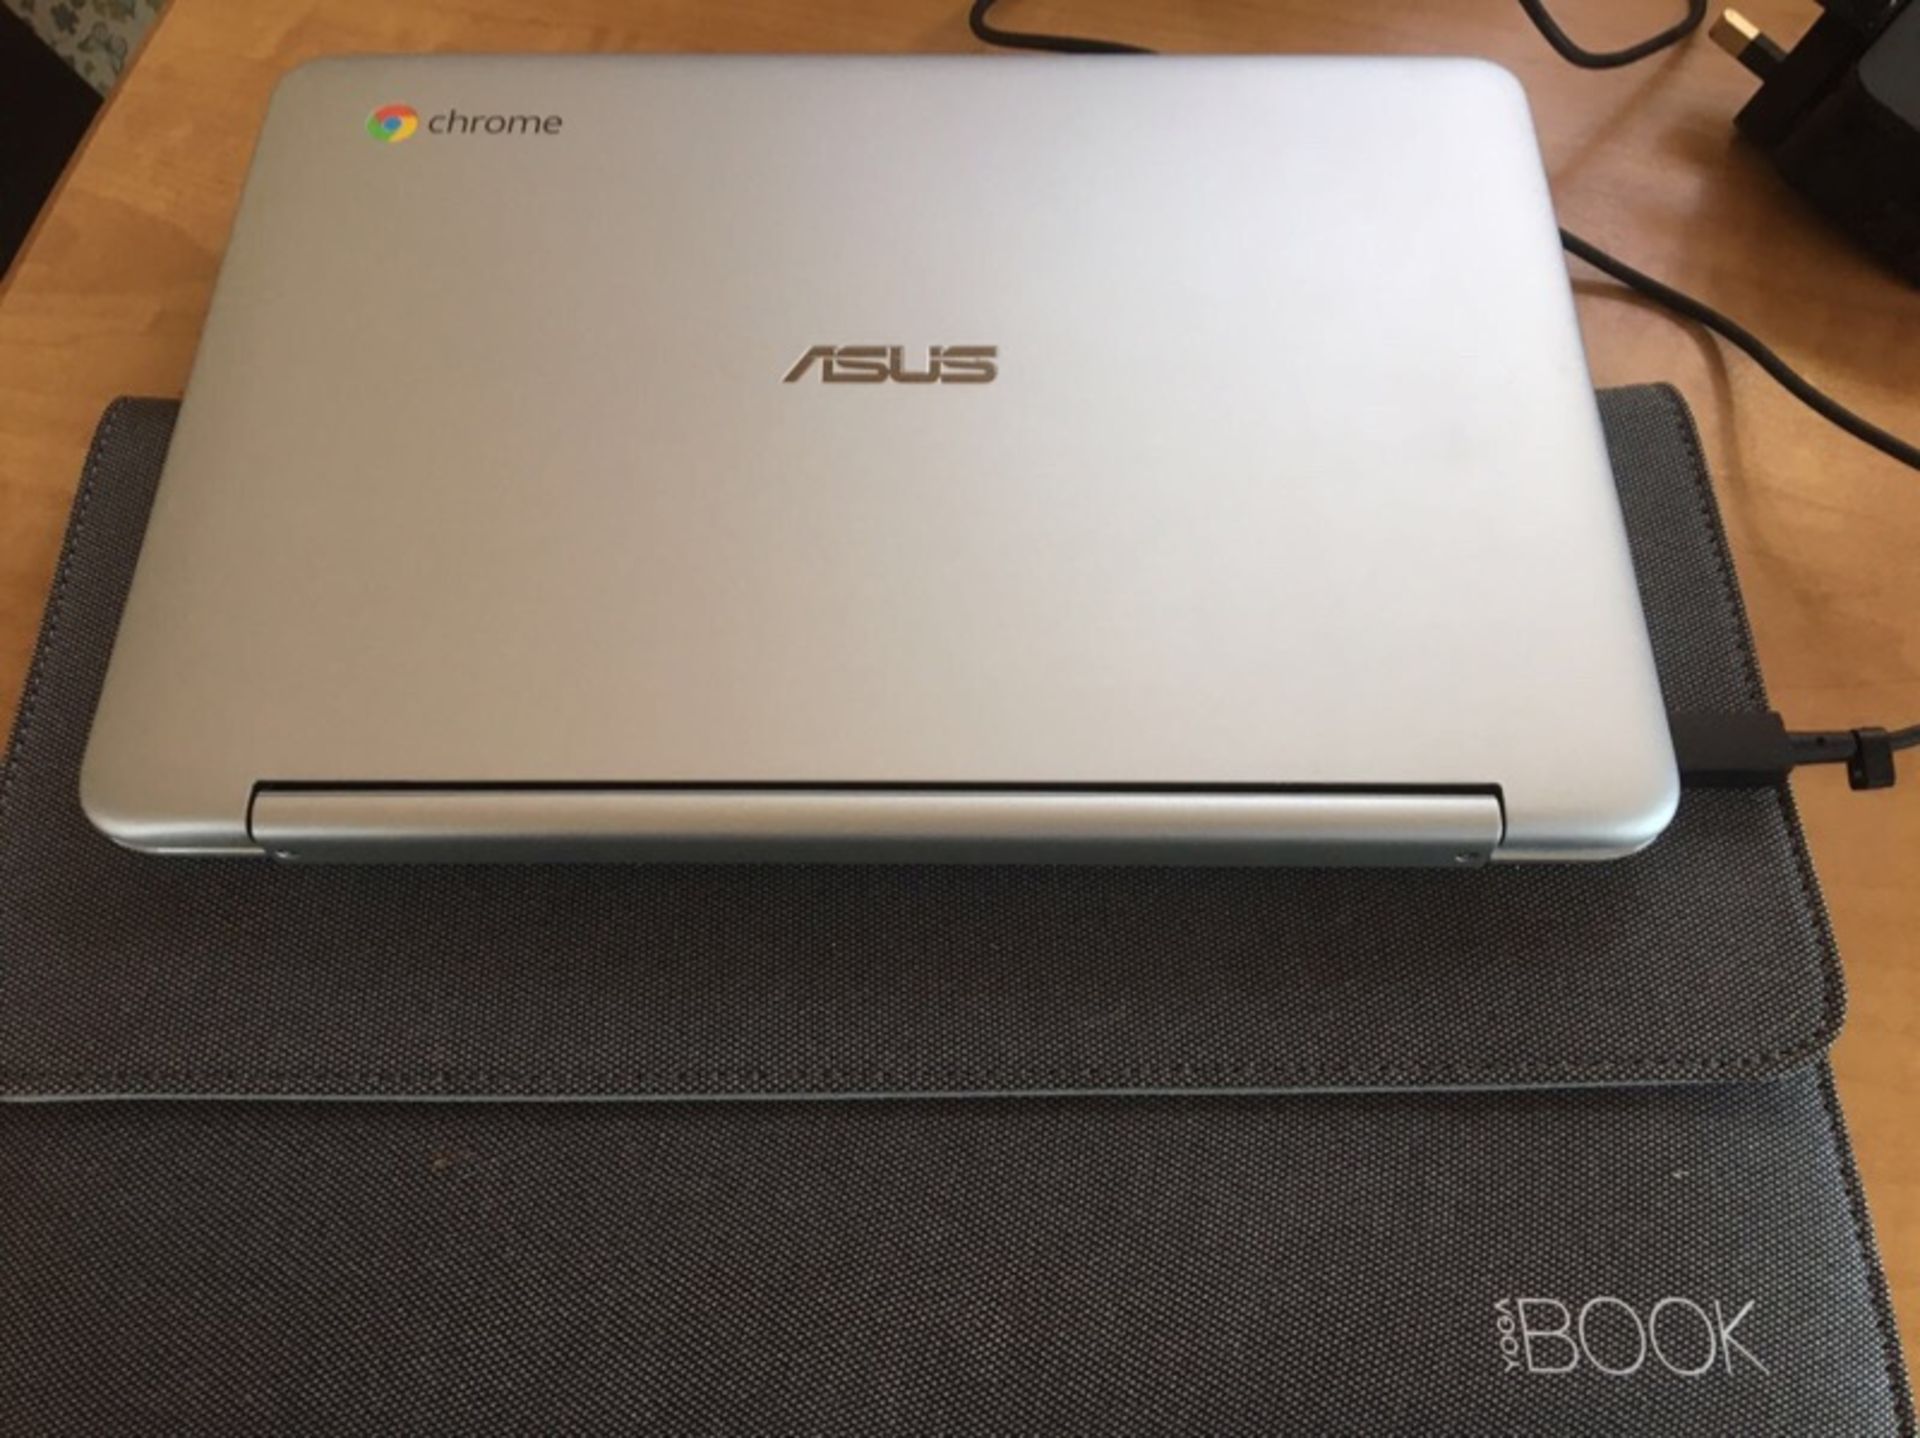 ASUS NOTEBOOK PC C100P WITH CASE & CHARGER - Image 3 of 3